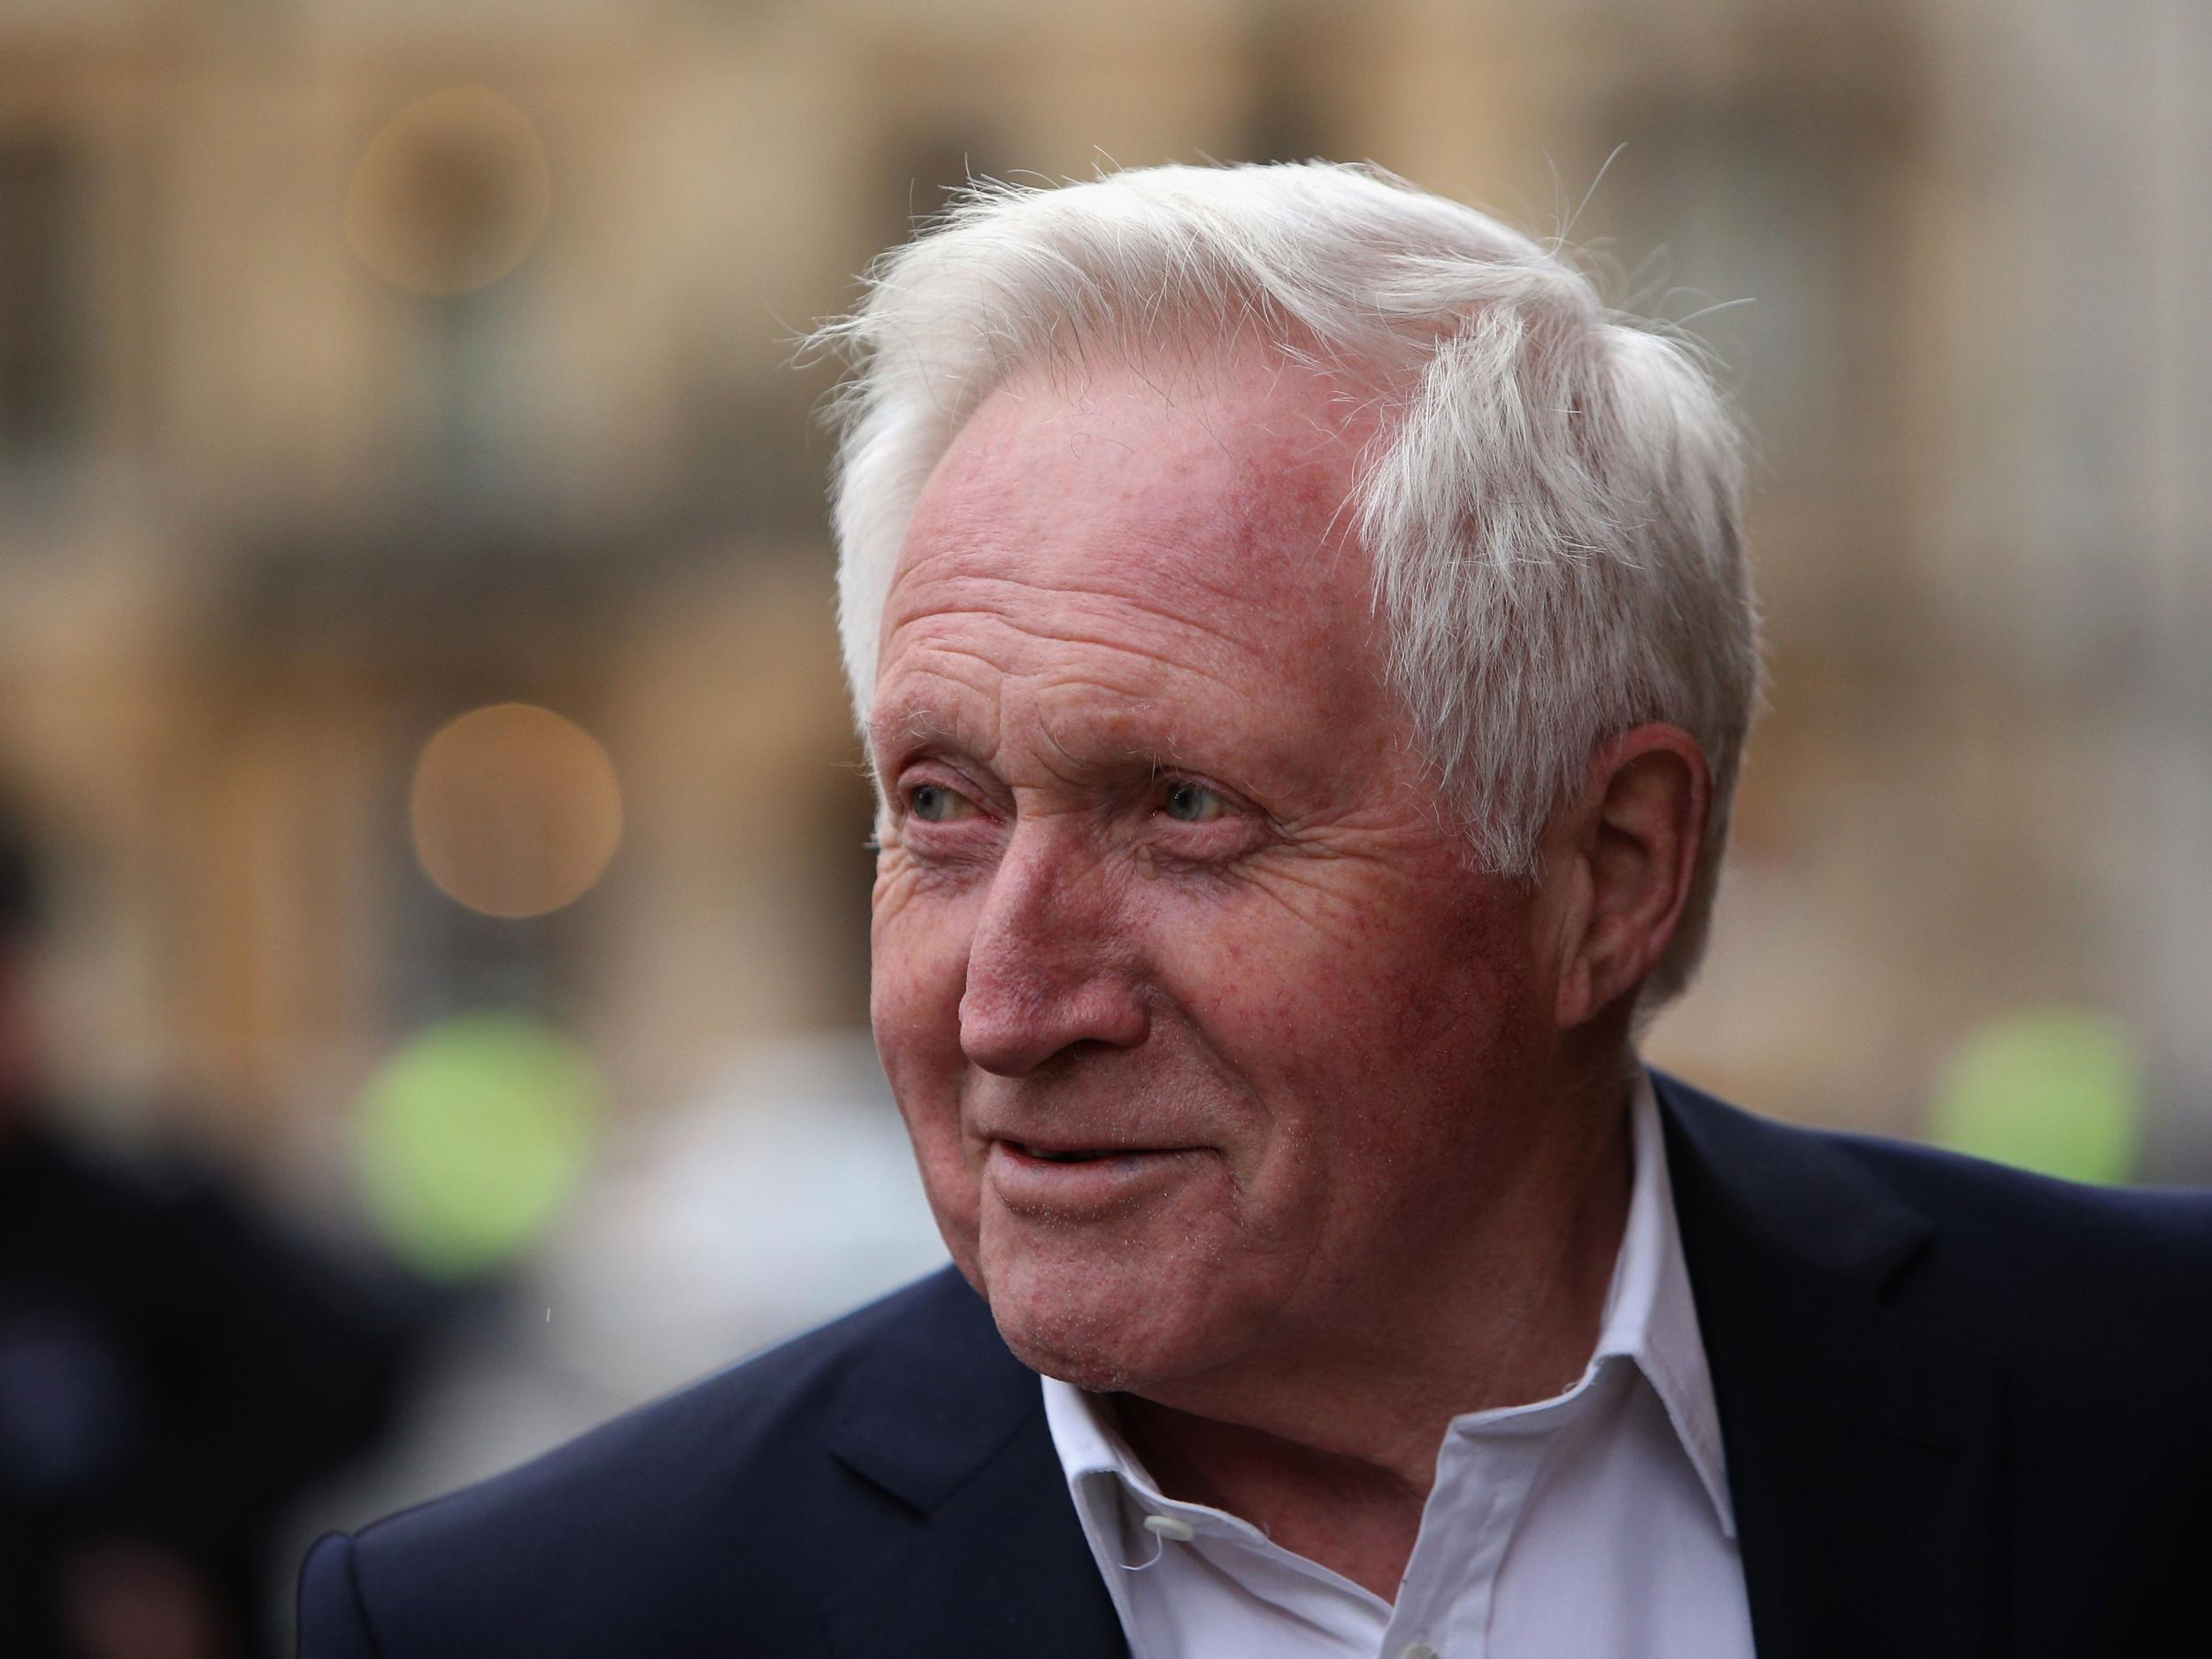 &#13;
David Dimbleby presented his 10th general election for the BBC in 2017 &#13;